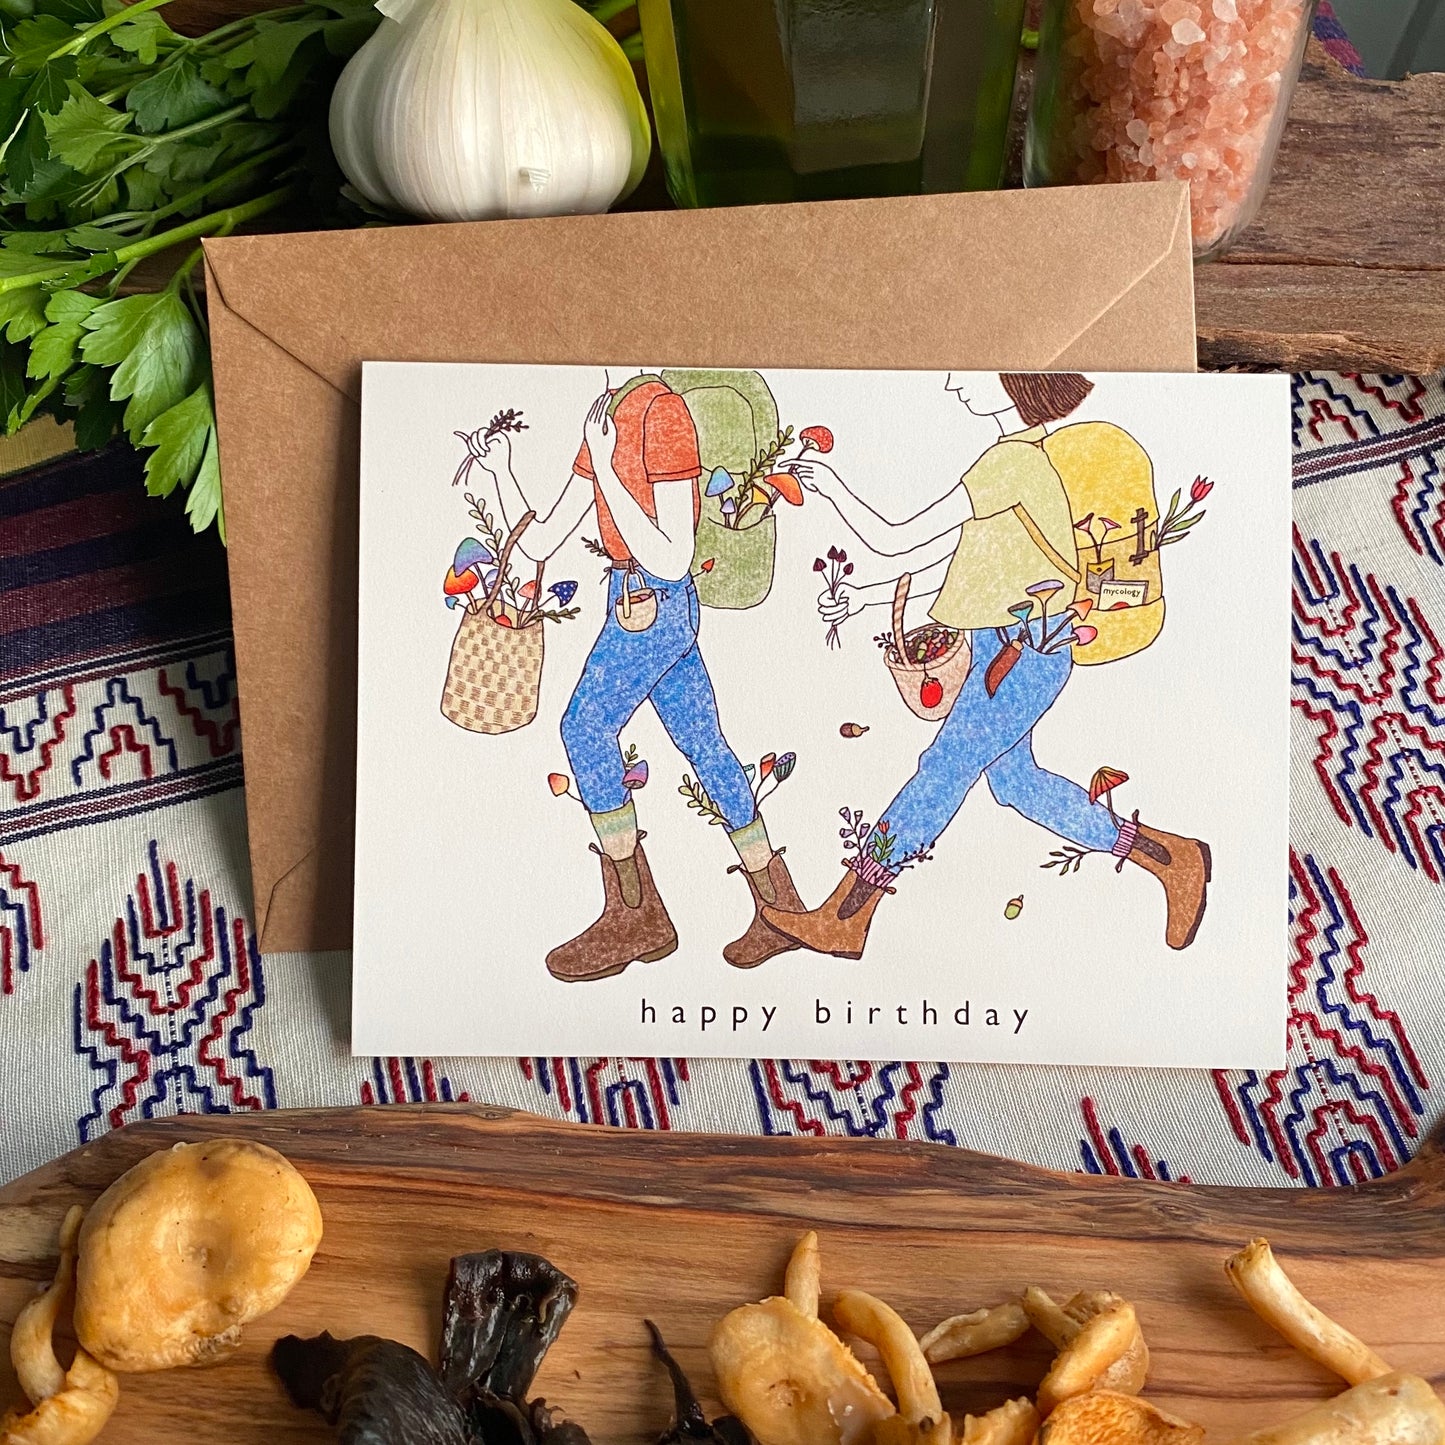 Birthday Card Set with an illustration of two hikers foraging  mushrooms together